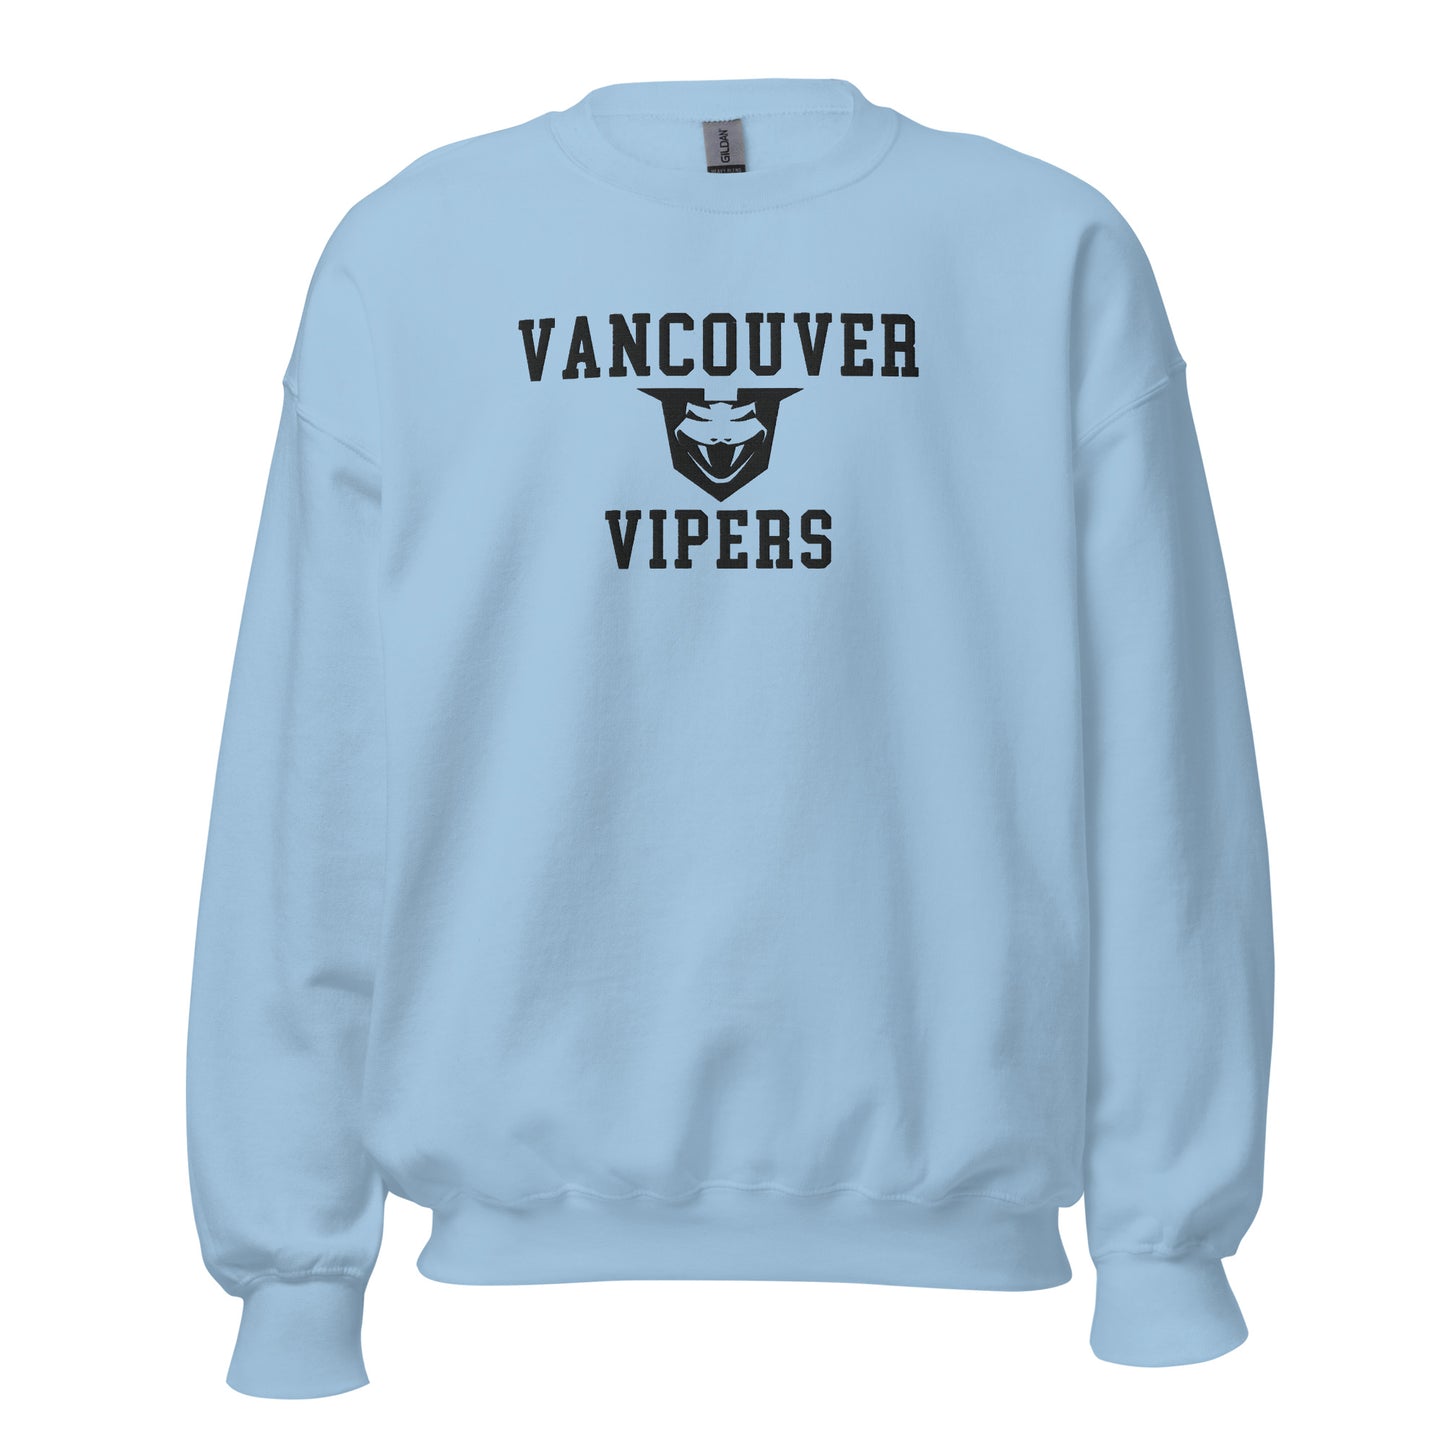 Vancouver Vipers Embroidered Sweatshirt